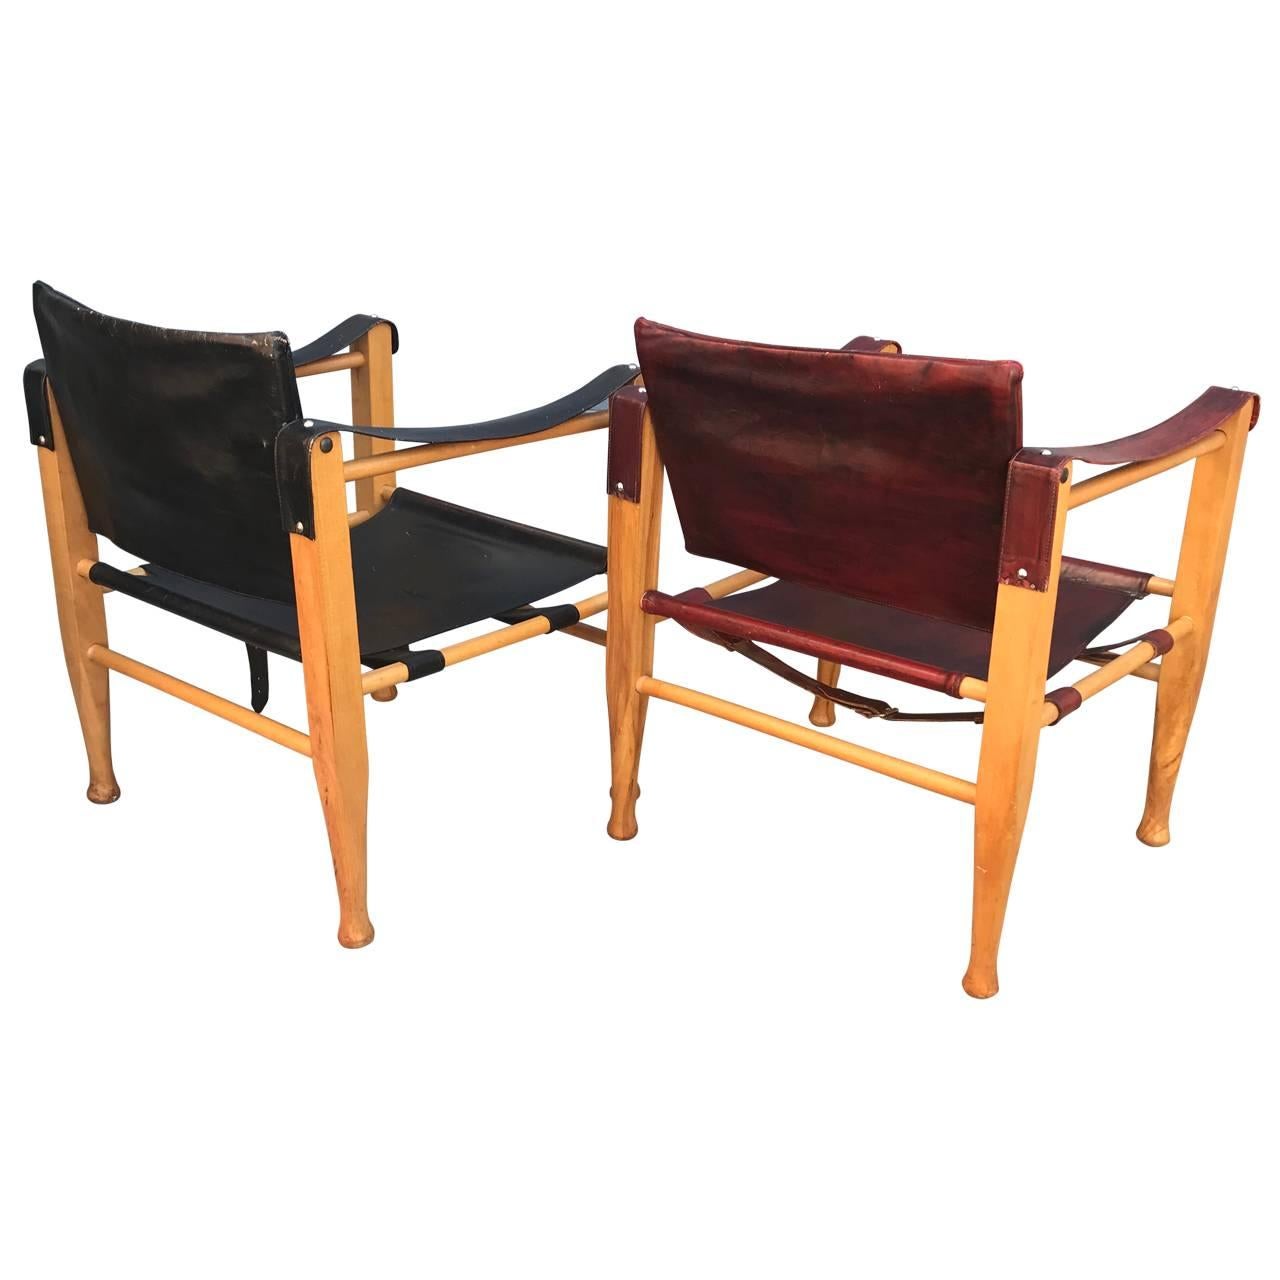 20th Century Set Of Danish Two Mid-Century Modern Safari Chairs, One Red And One Black